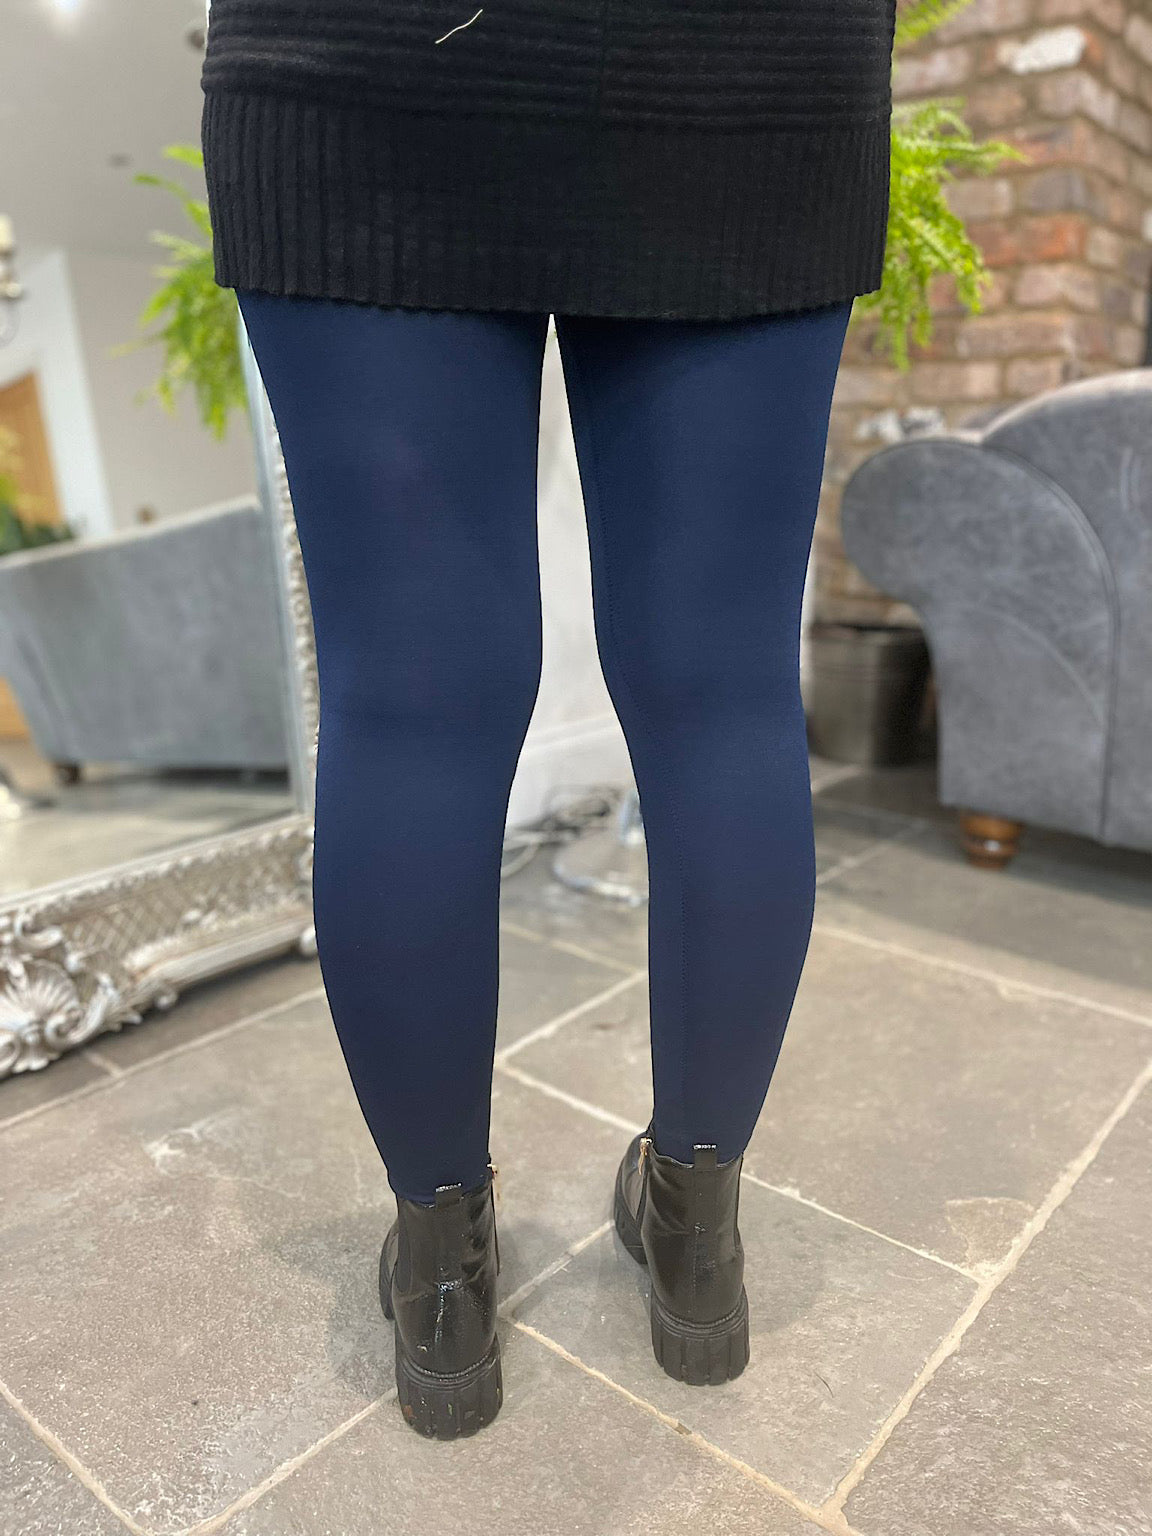 Midnight Blue Fleece Lined Thermal Leggings - British made by Ruby